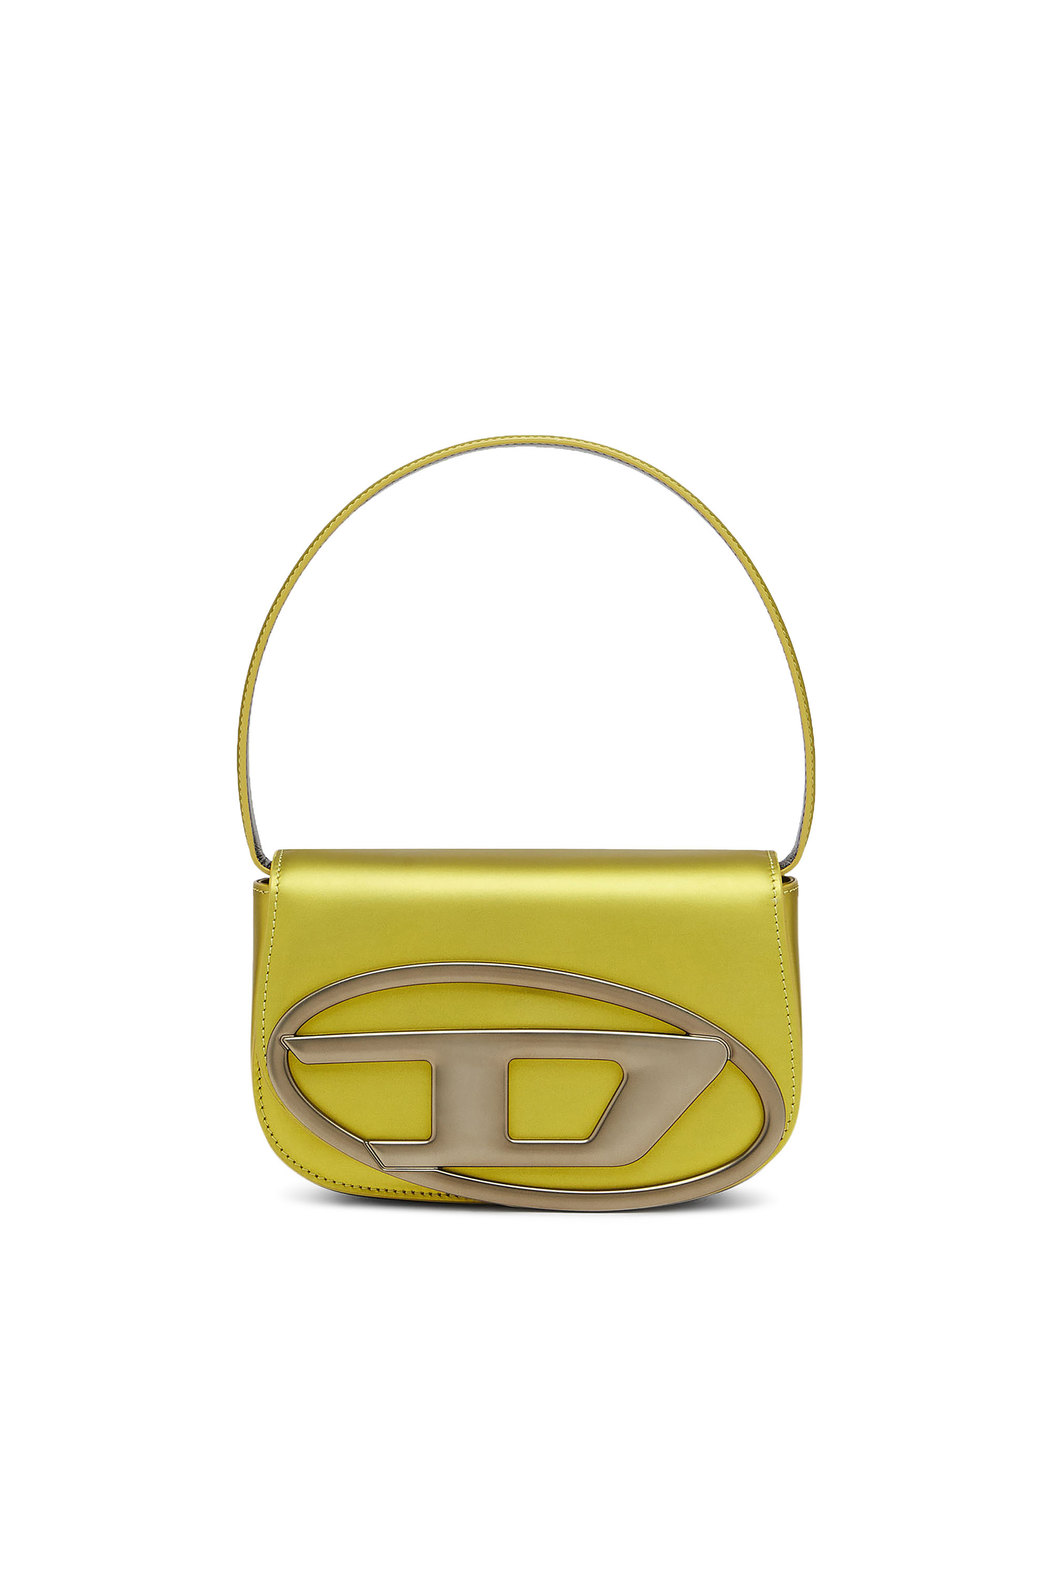 1DR - Iconic shoulder bag in metallic leather